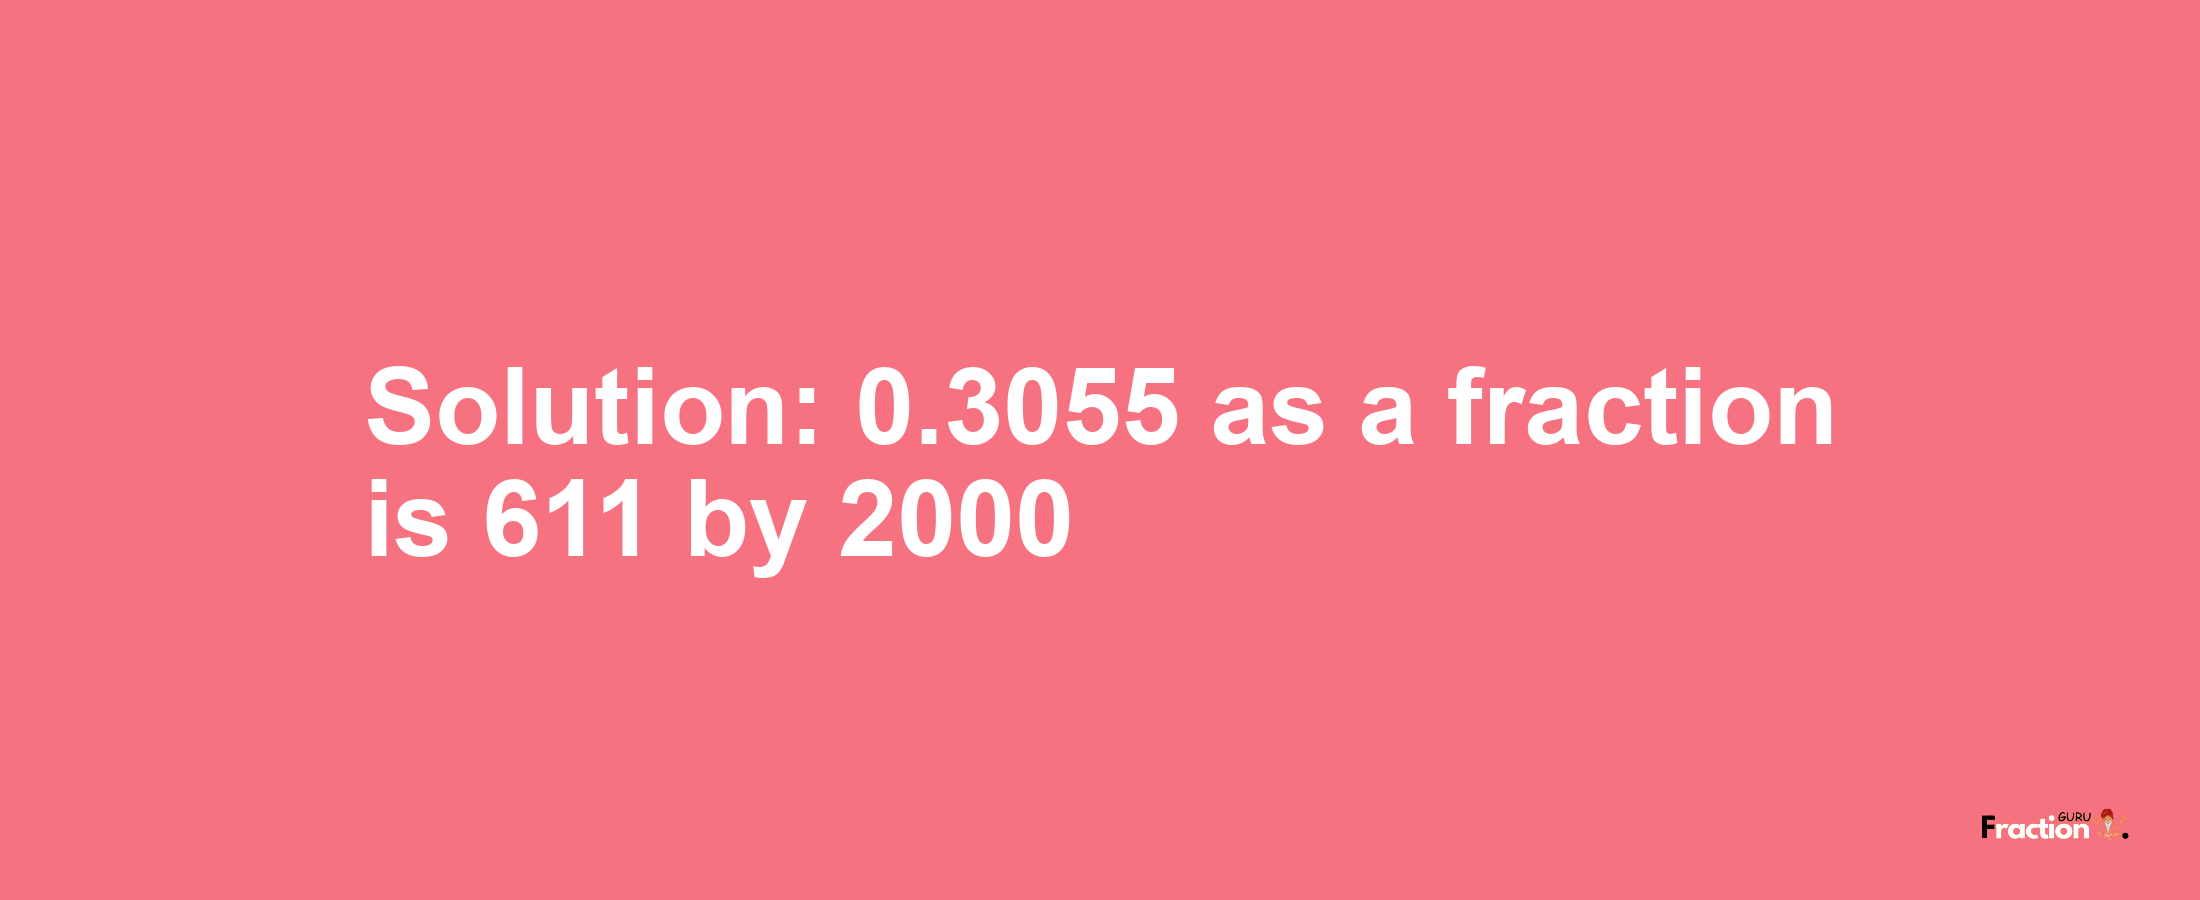 Solution:0.3055 as a fraction is 611/2000